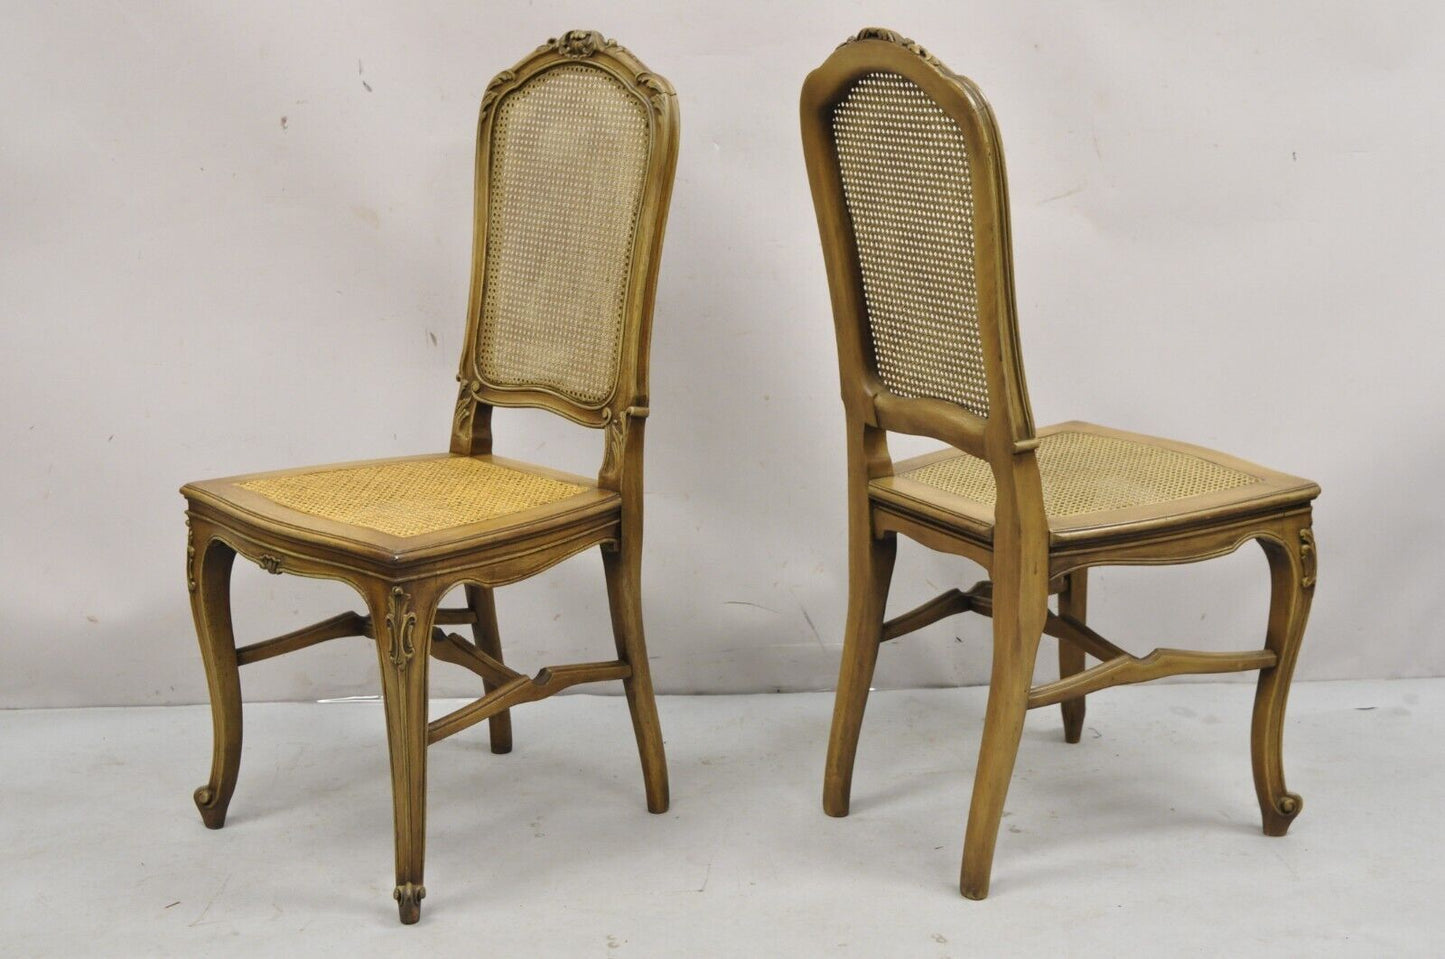 Antique French Provincial Louis XV Style Carved Walnut Cane Dining Chair - Pair